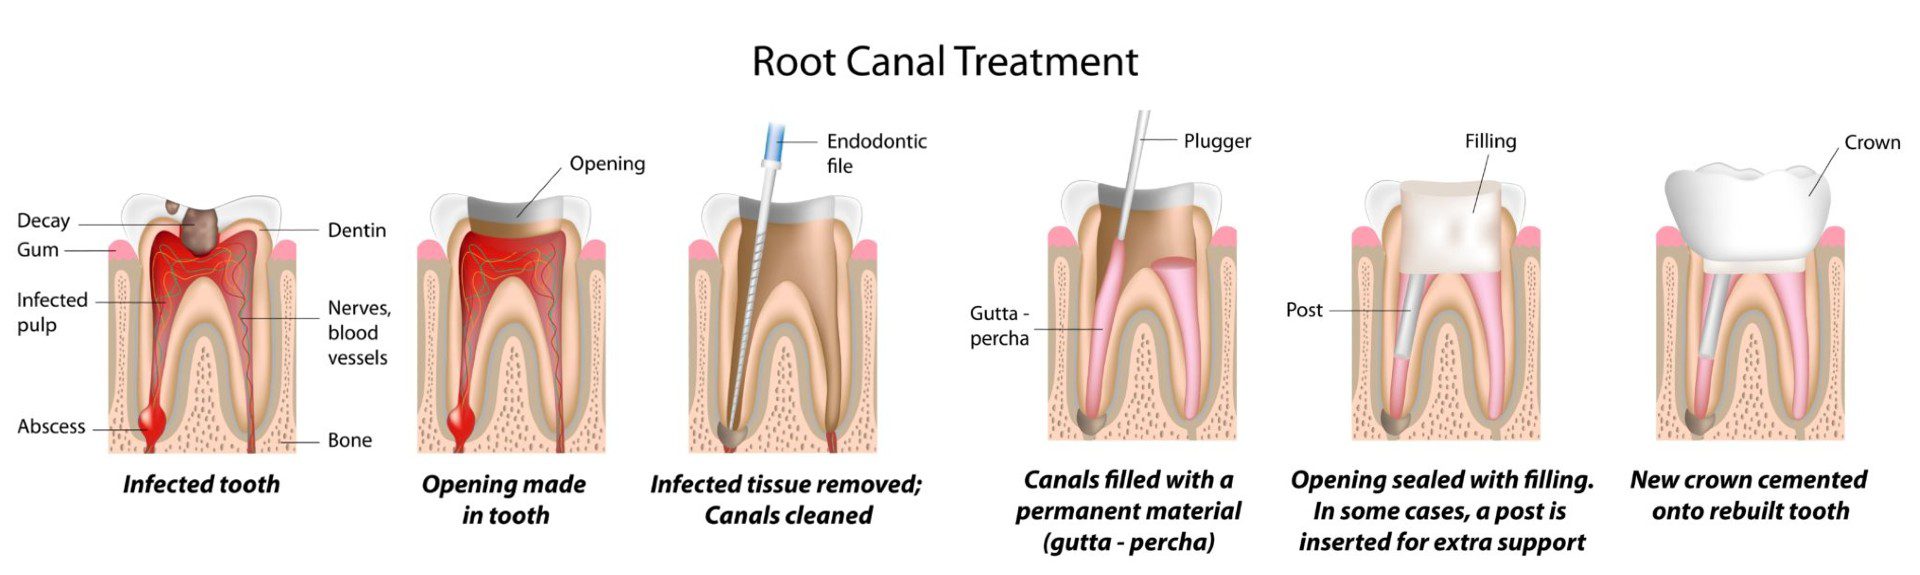 Root Canal Treatment Graphical Image01